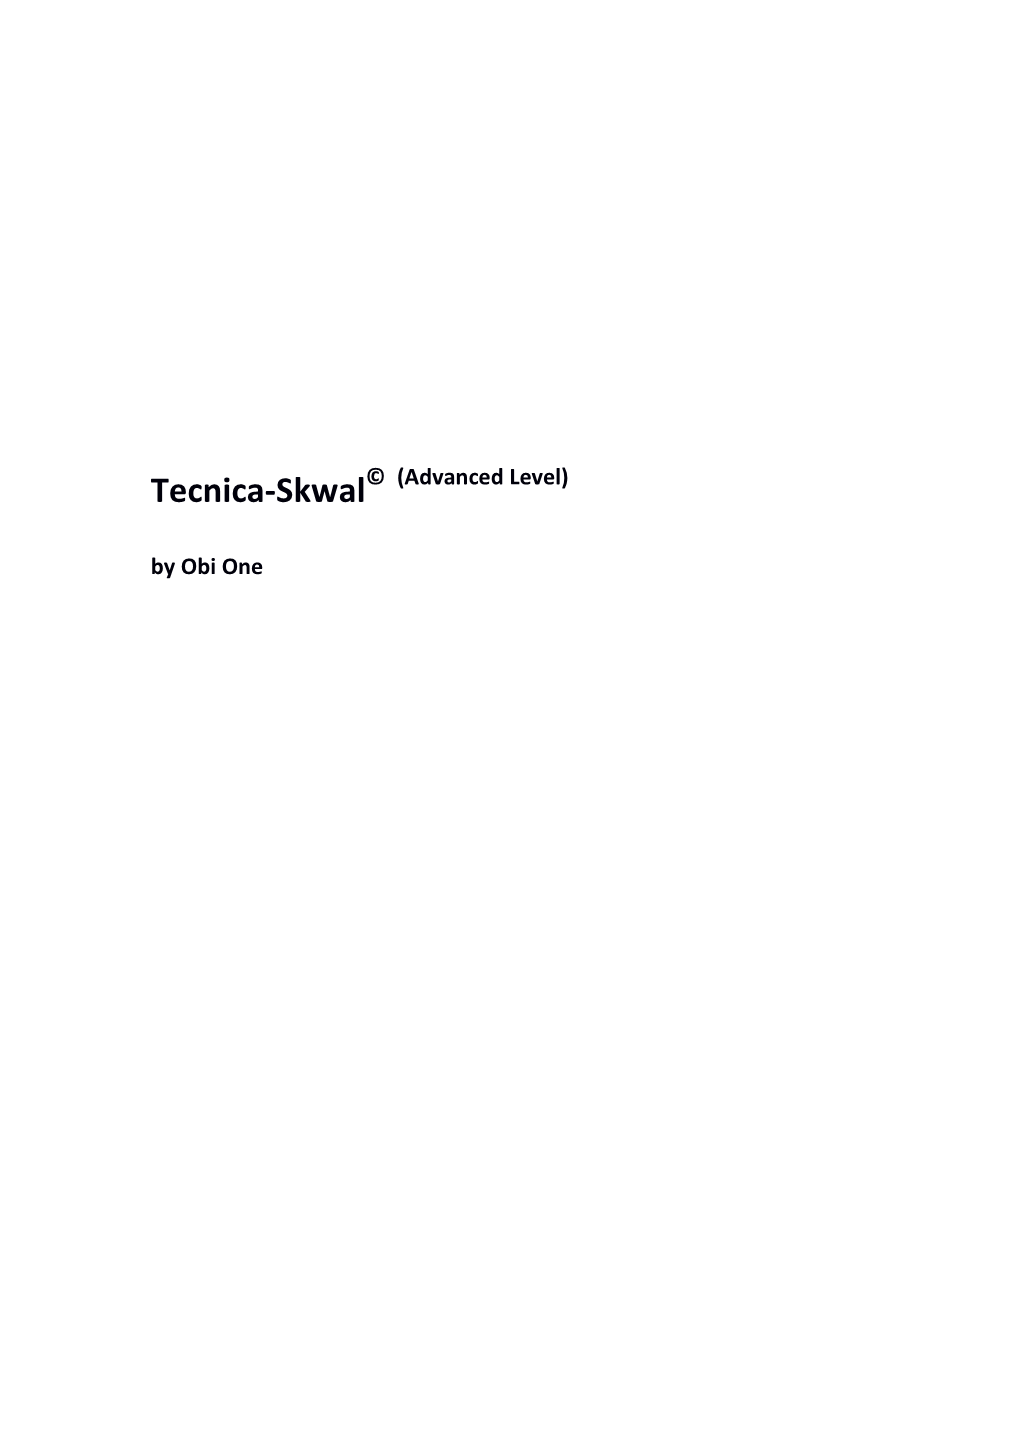 Tecnica-Skwal © (Advanced Level) by Obi One